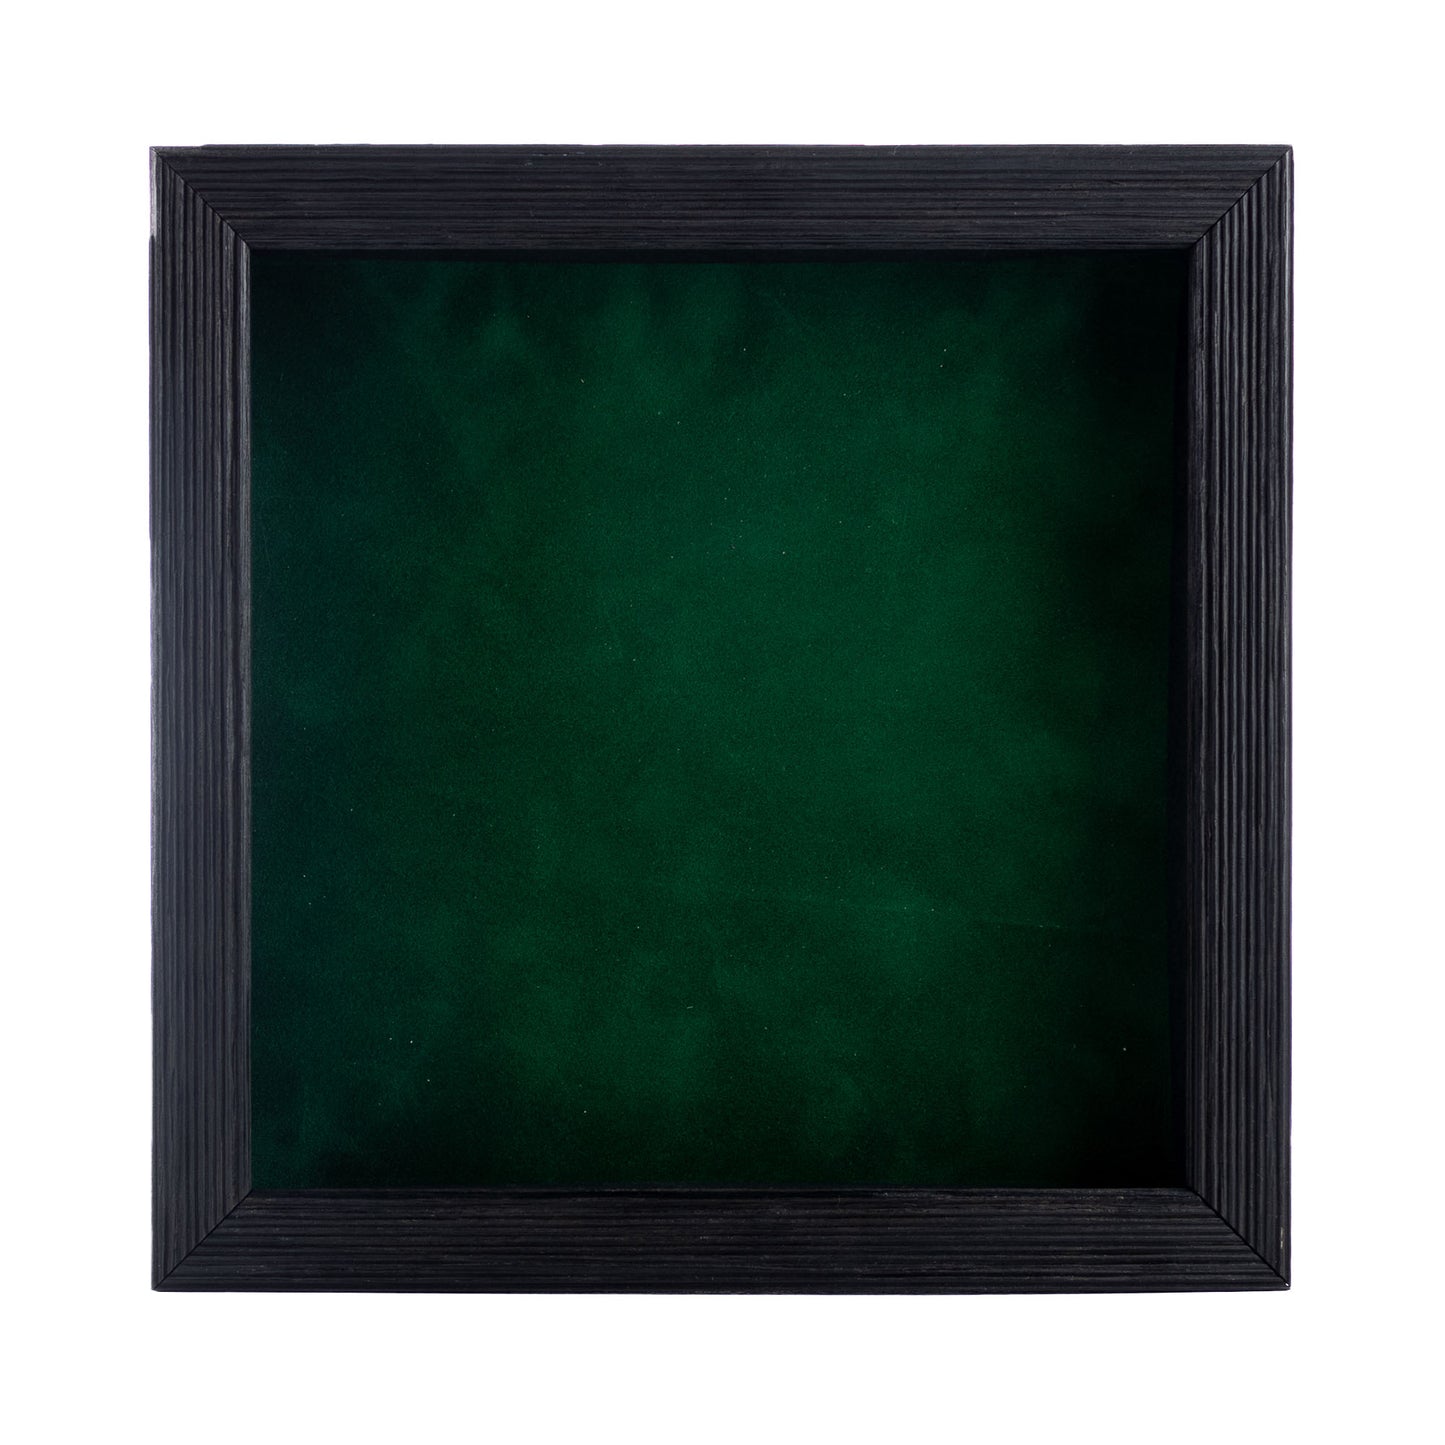 Distressed Black Shadow Box Frame With Forest Green Acid-Free Suede Backing